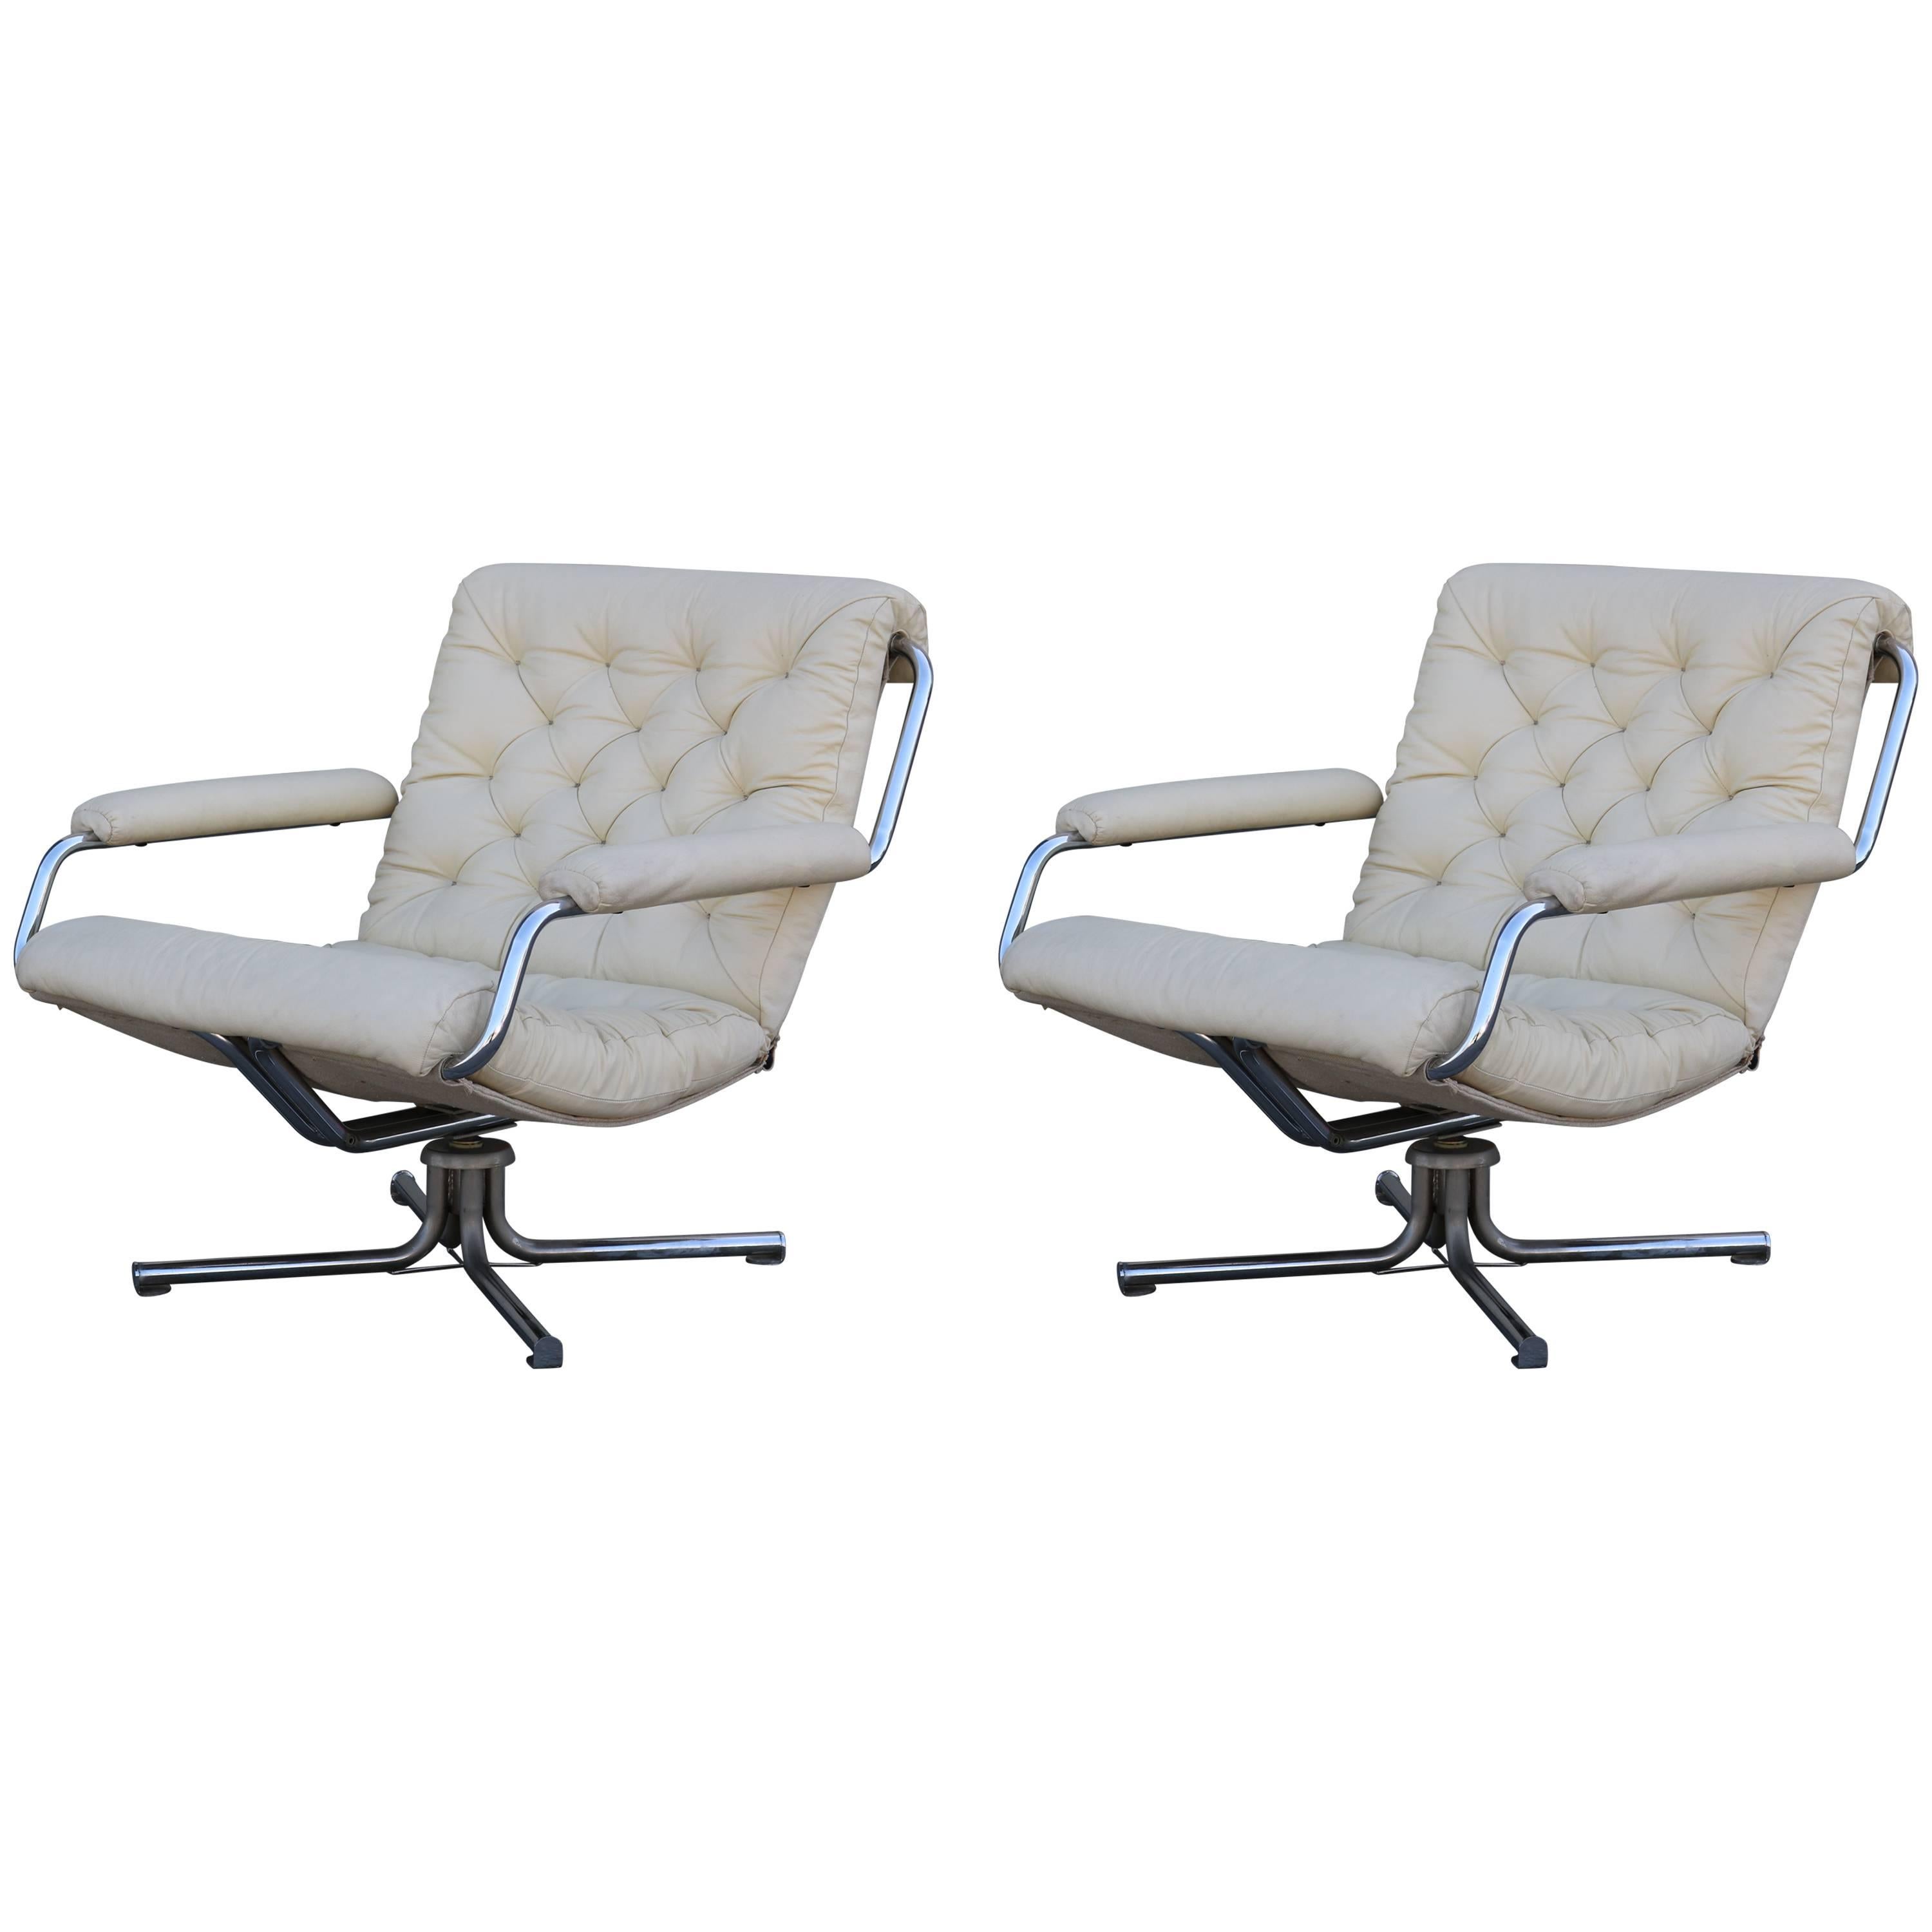 Pair of Cream Tufted Leather and Chrome 1970s Swivel Chairs